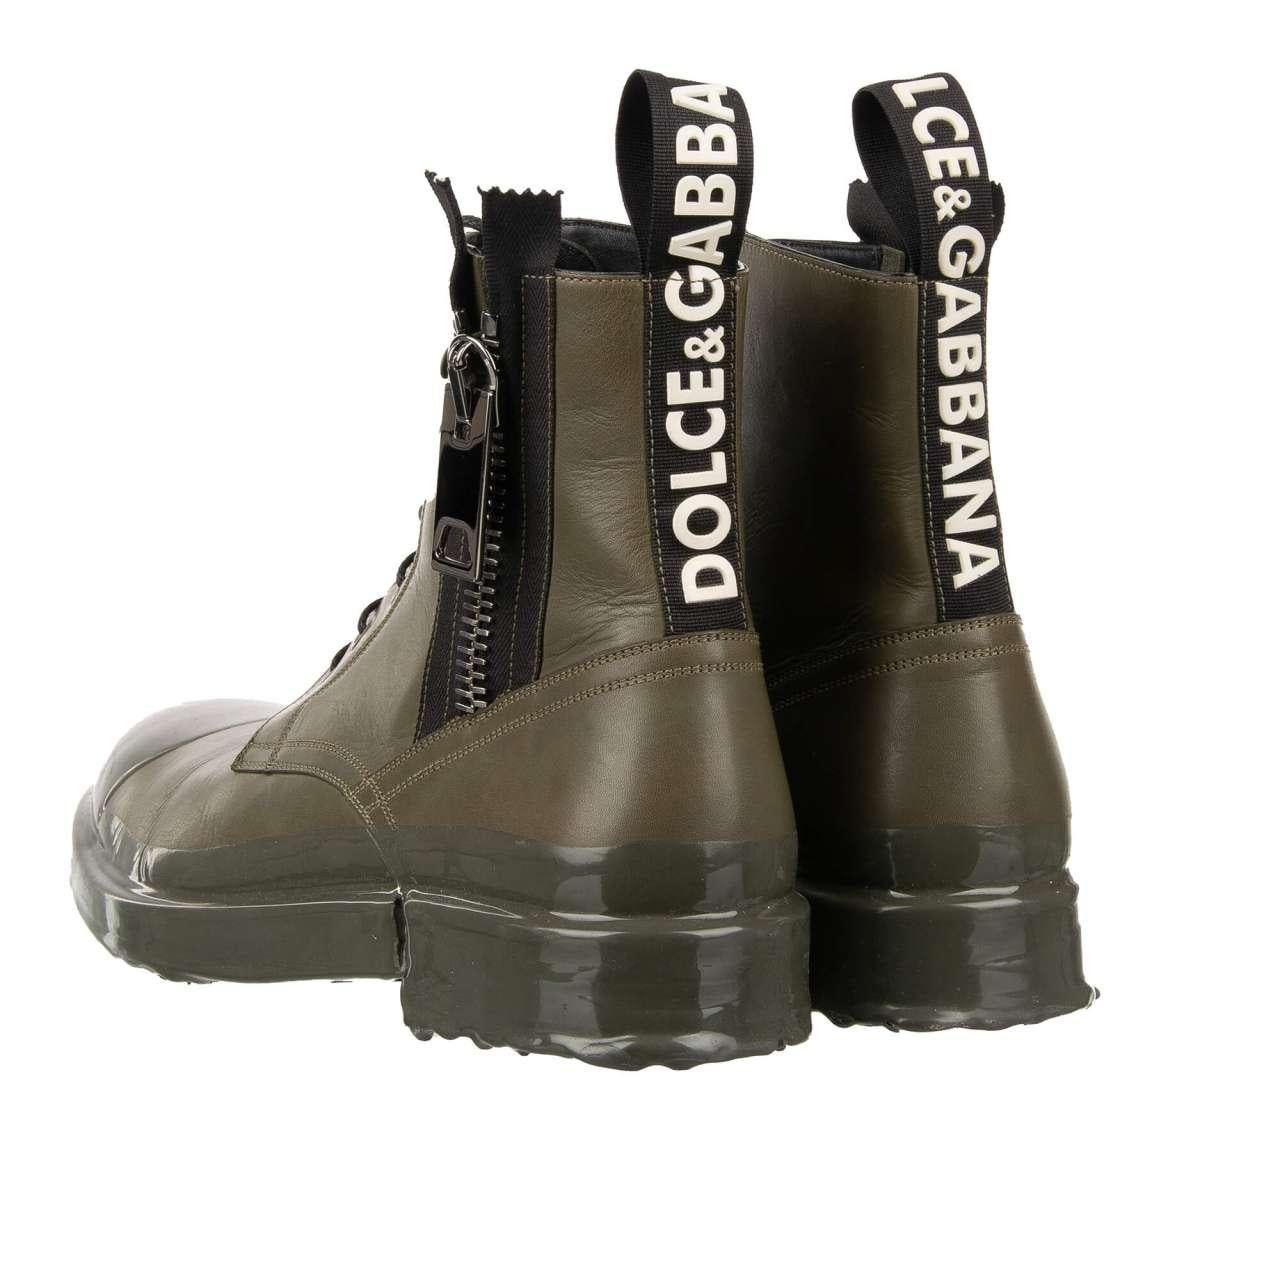 Dolce & Gabbana DG Logo Leather Ankle Boots FIRENZE Military Green EUR 42 In Excellent Condition For Sale In Erkrath, DE